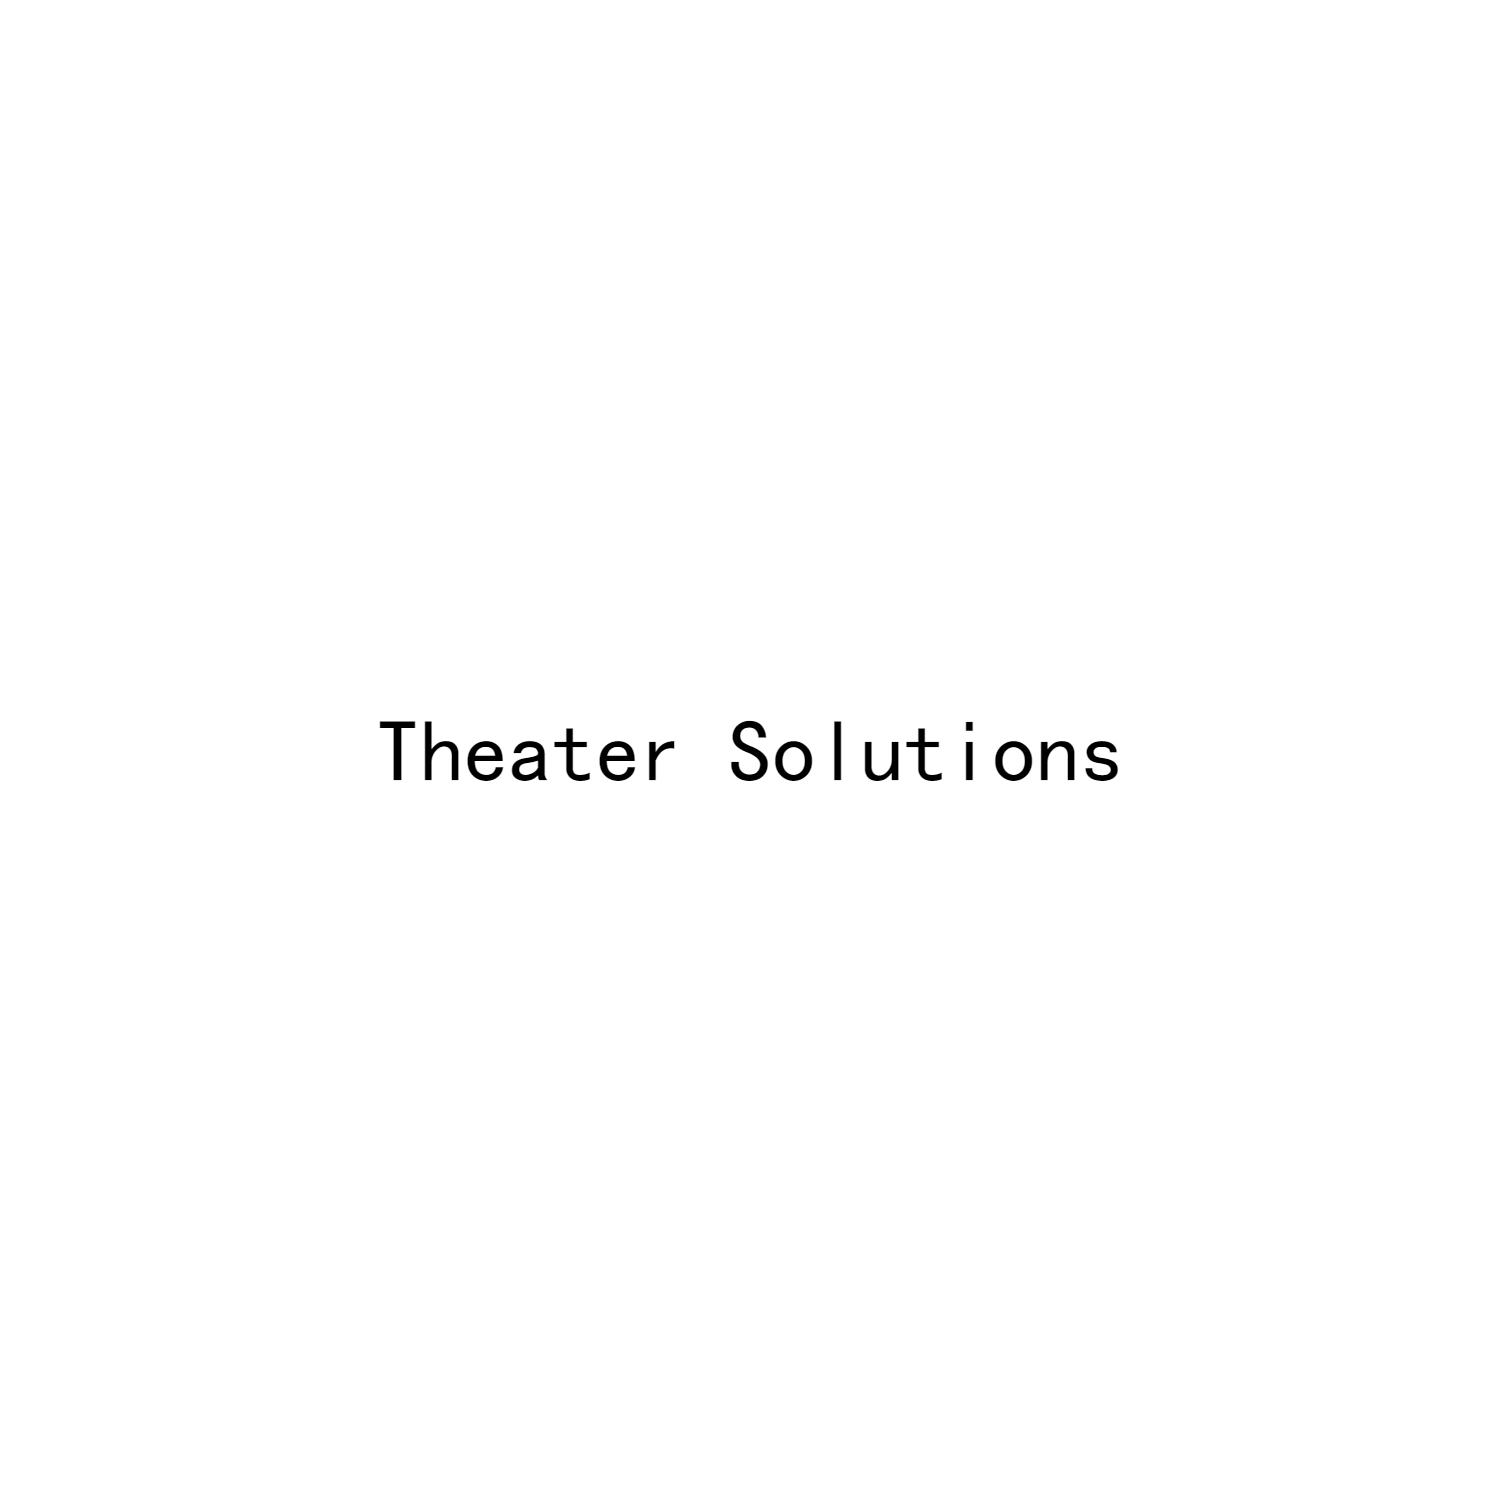 THEATER SOLUTIONS